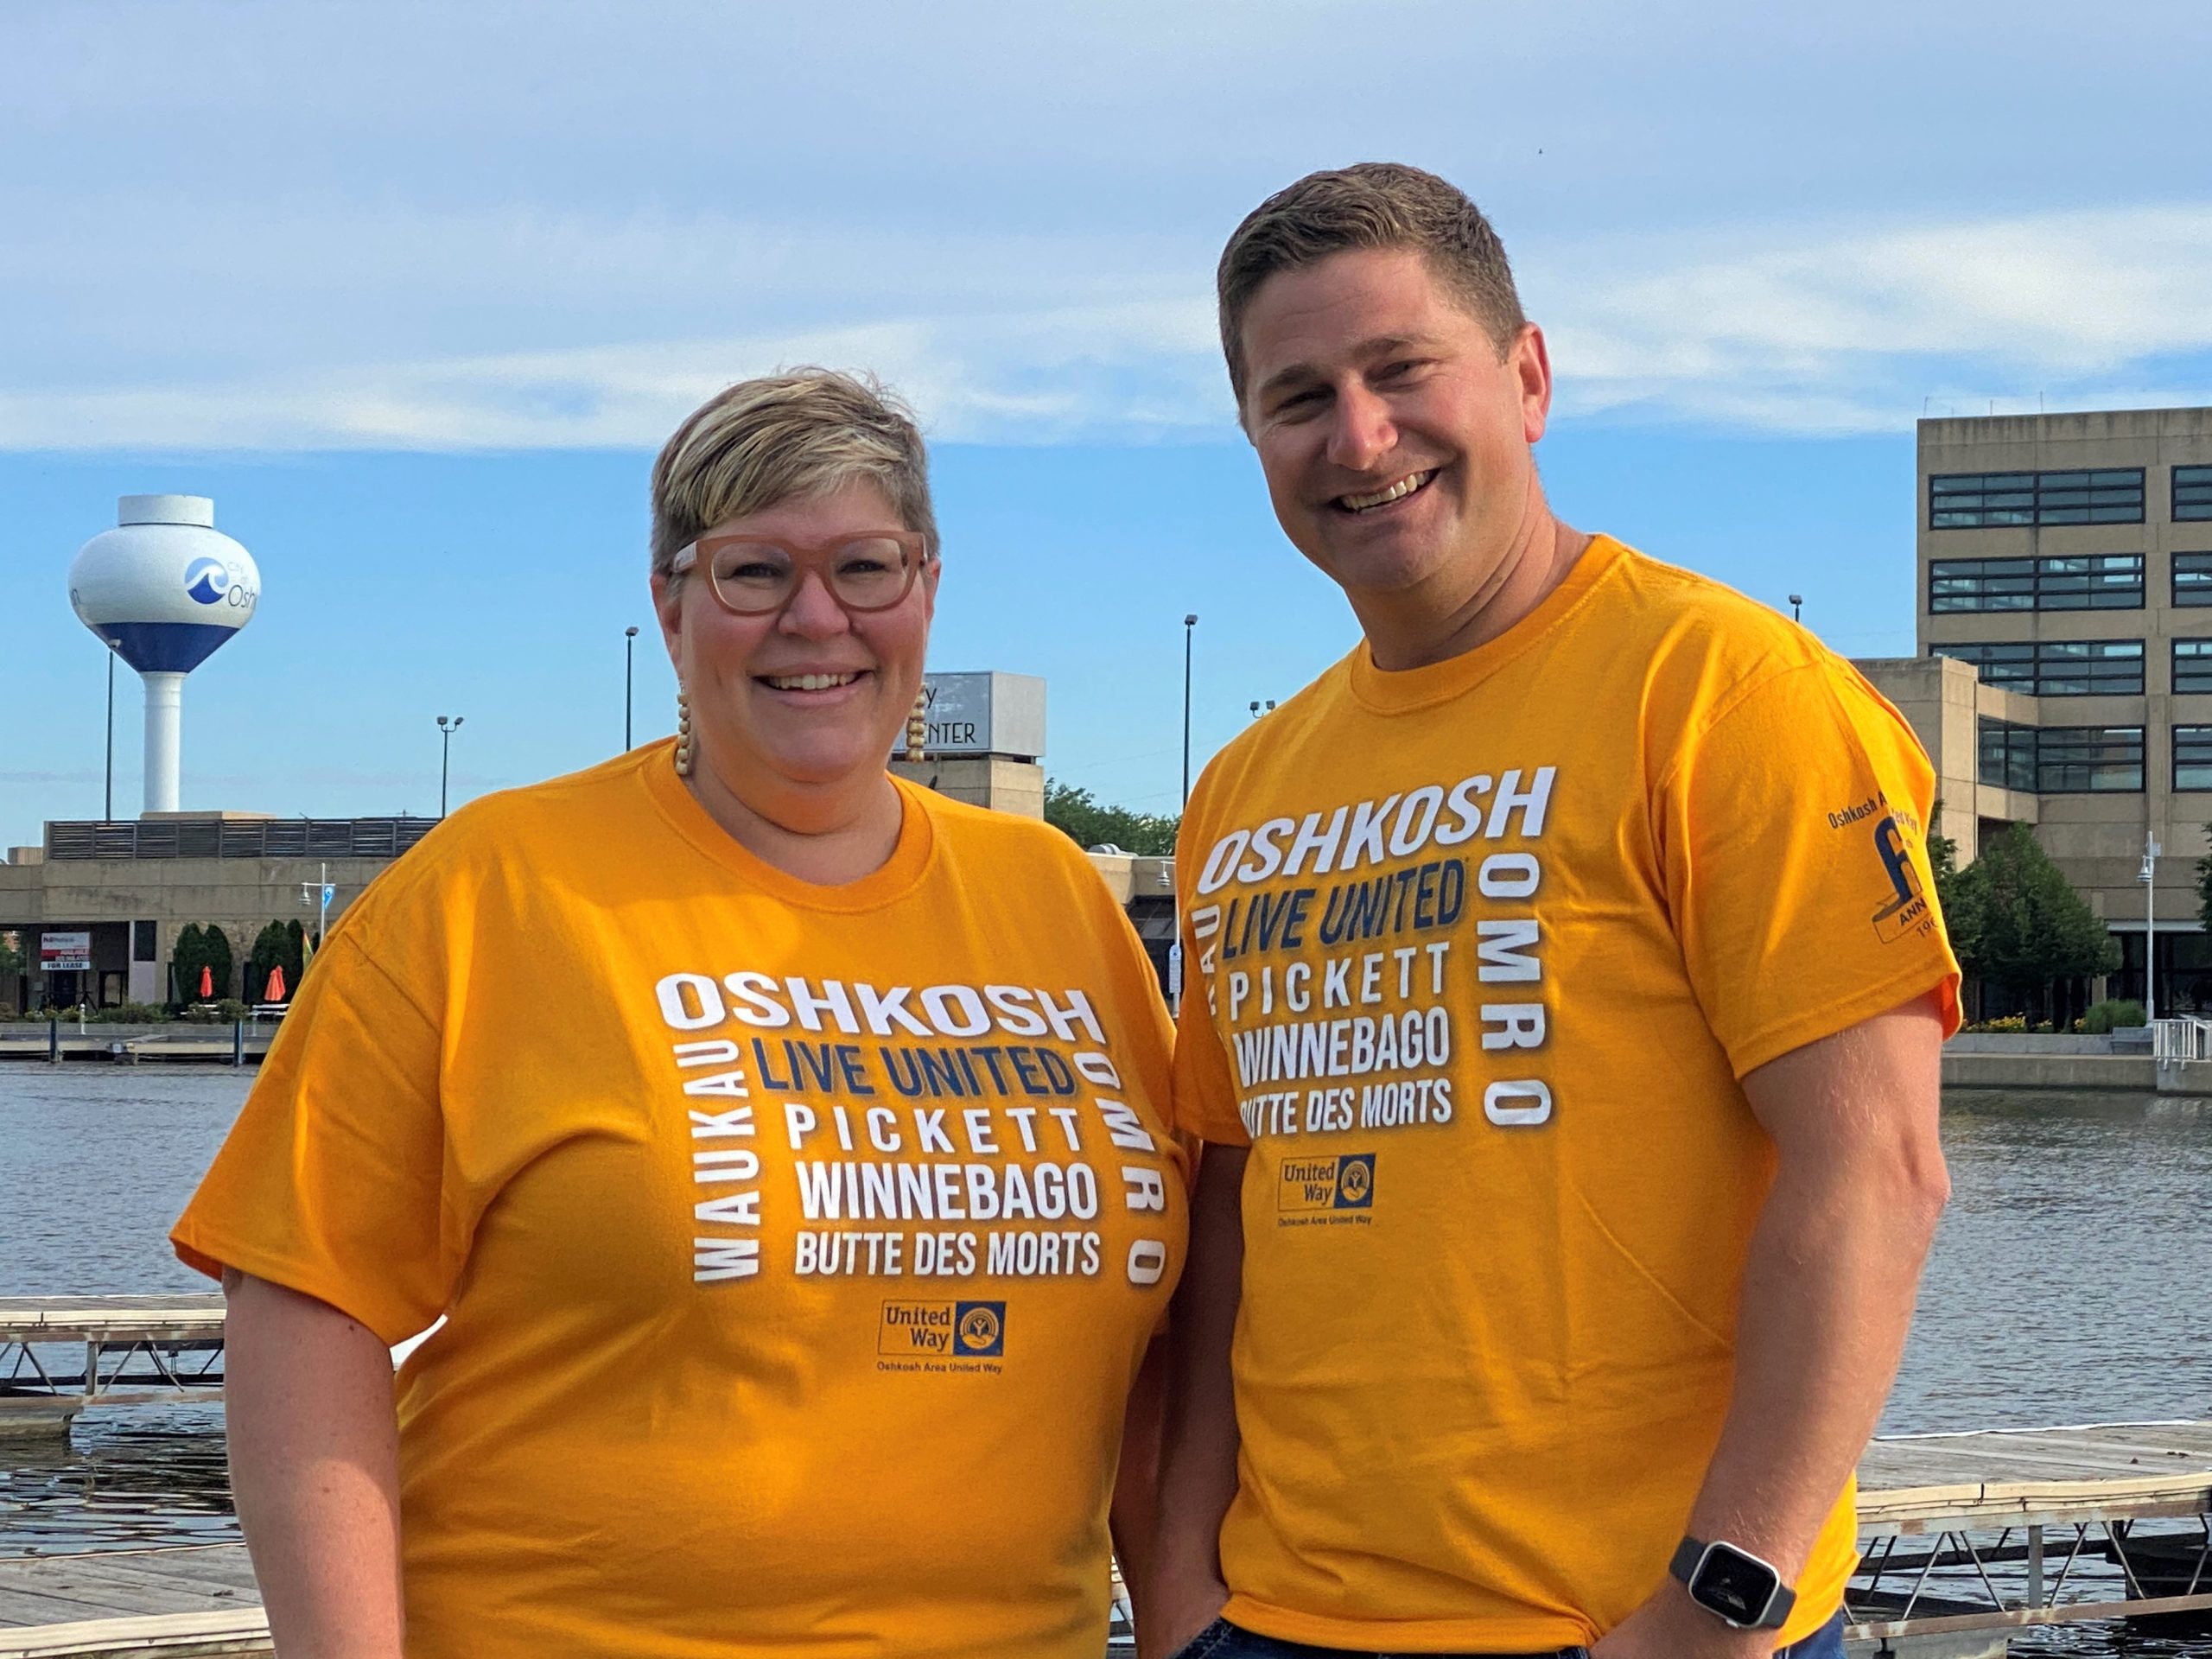 OAUW ANNOUNCES 2022 CAMPAIGN CO-CHAIRS